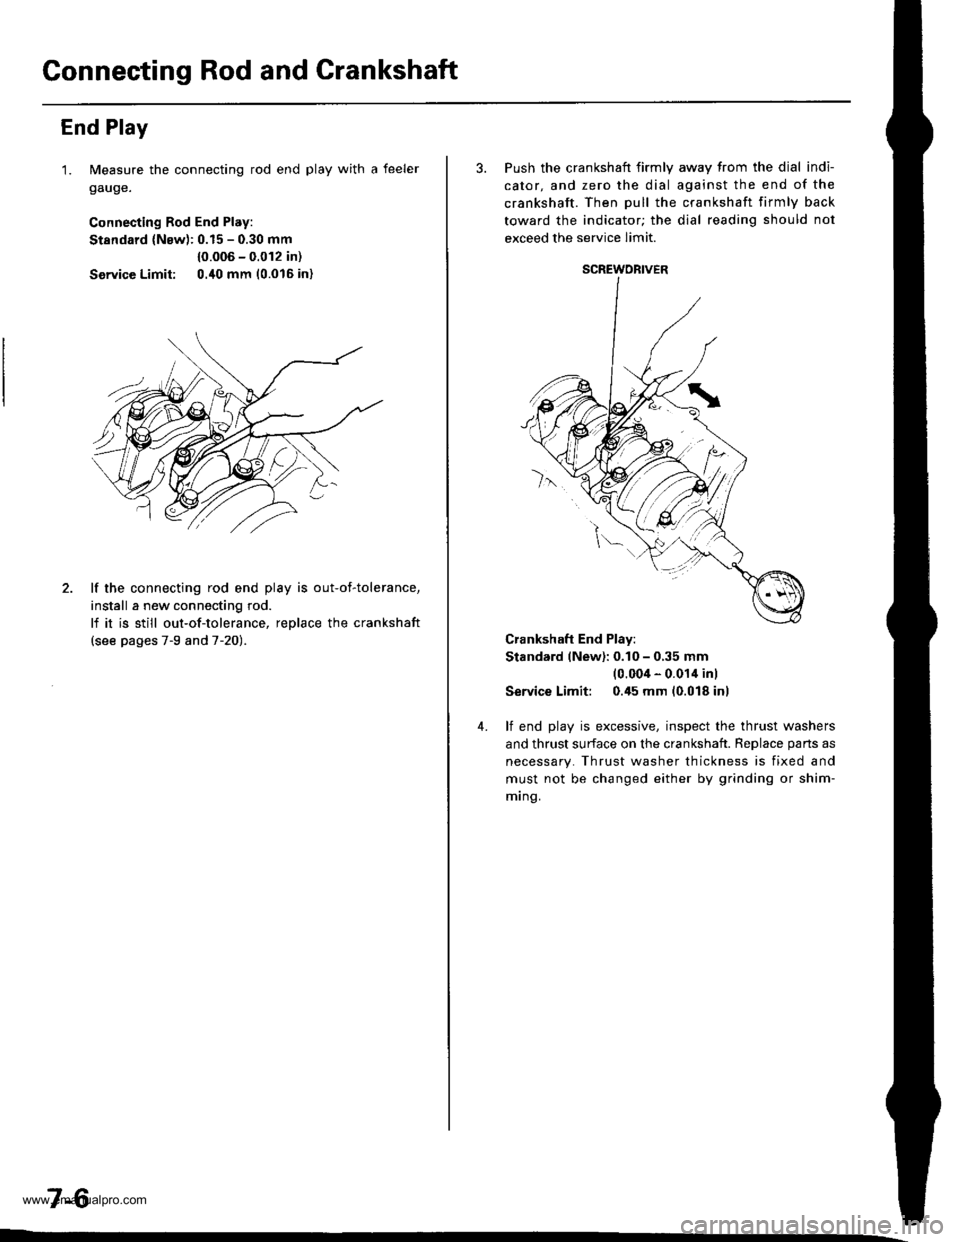 HONDA CR-V 1997 RD1-RD3 / 1.G Workshop Manual 
Connecting Rod and Crankshaft
End Play
1. Measure the connecting rod end play with a feeler
gauge.
Connecting Rod End Play:
Stsndard (Nsw): 0.15 - 0.30 mm
{0.006 - 0.012 in)
Service Limit: 0./t0 mm 1